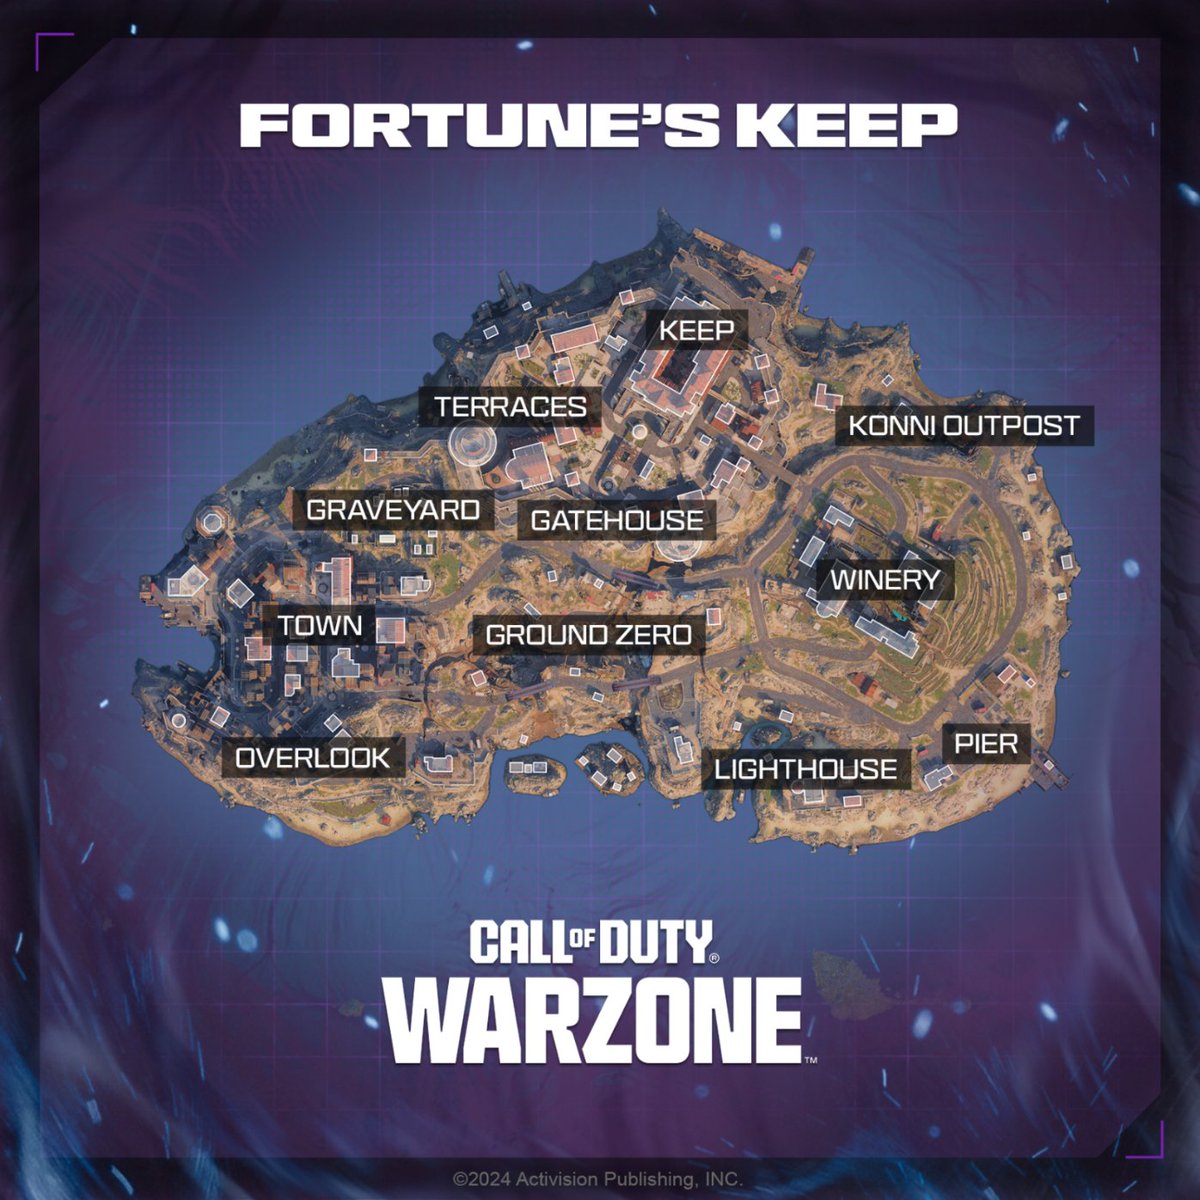 Play for keeps. Play for free - Fortune's Keep returns 🏰 Experience refreshed POIs, close-quarters chaos, and a few surprises along the way in Season 2 of Call of Duty #Warzone 👑